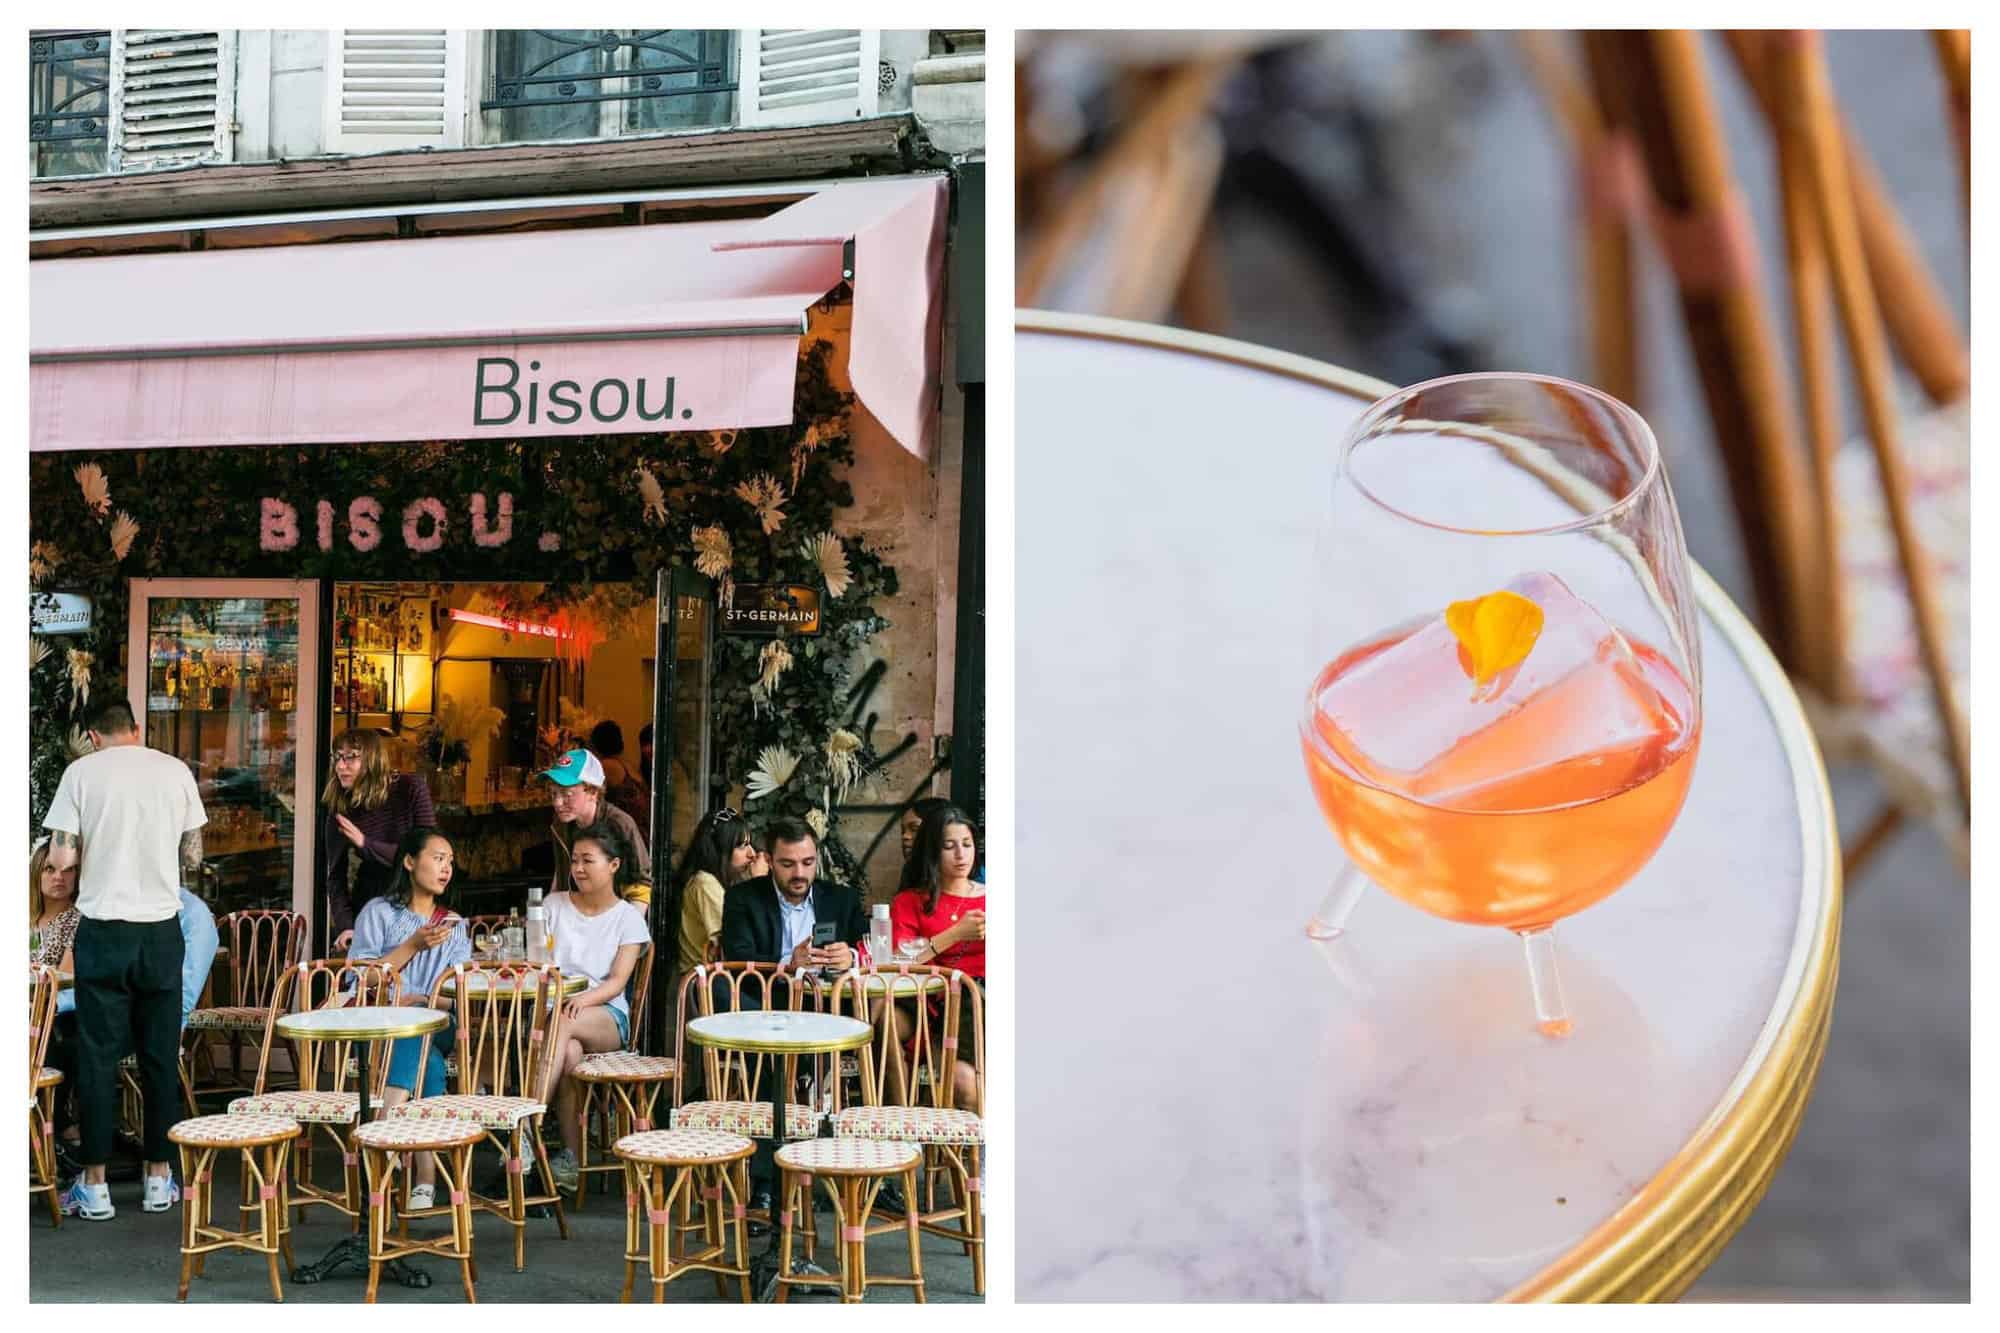 Left: the exterior of the bar in Paris called "Bisou." There is a pink awning with "Bisou." written in dark green. There are flowers and greenery on the façade of the building and there are several tables and chairs with people sitting at them. Right: An orange drink in a glass on a white marble table at "Bisou."